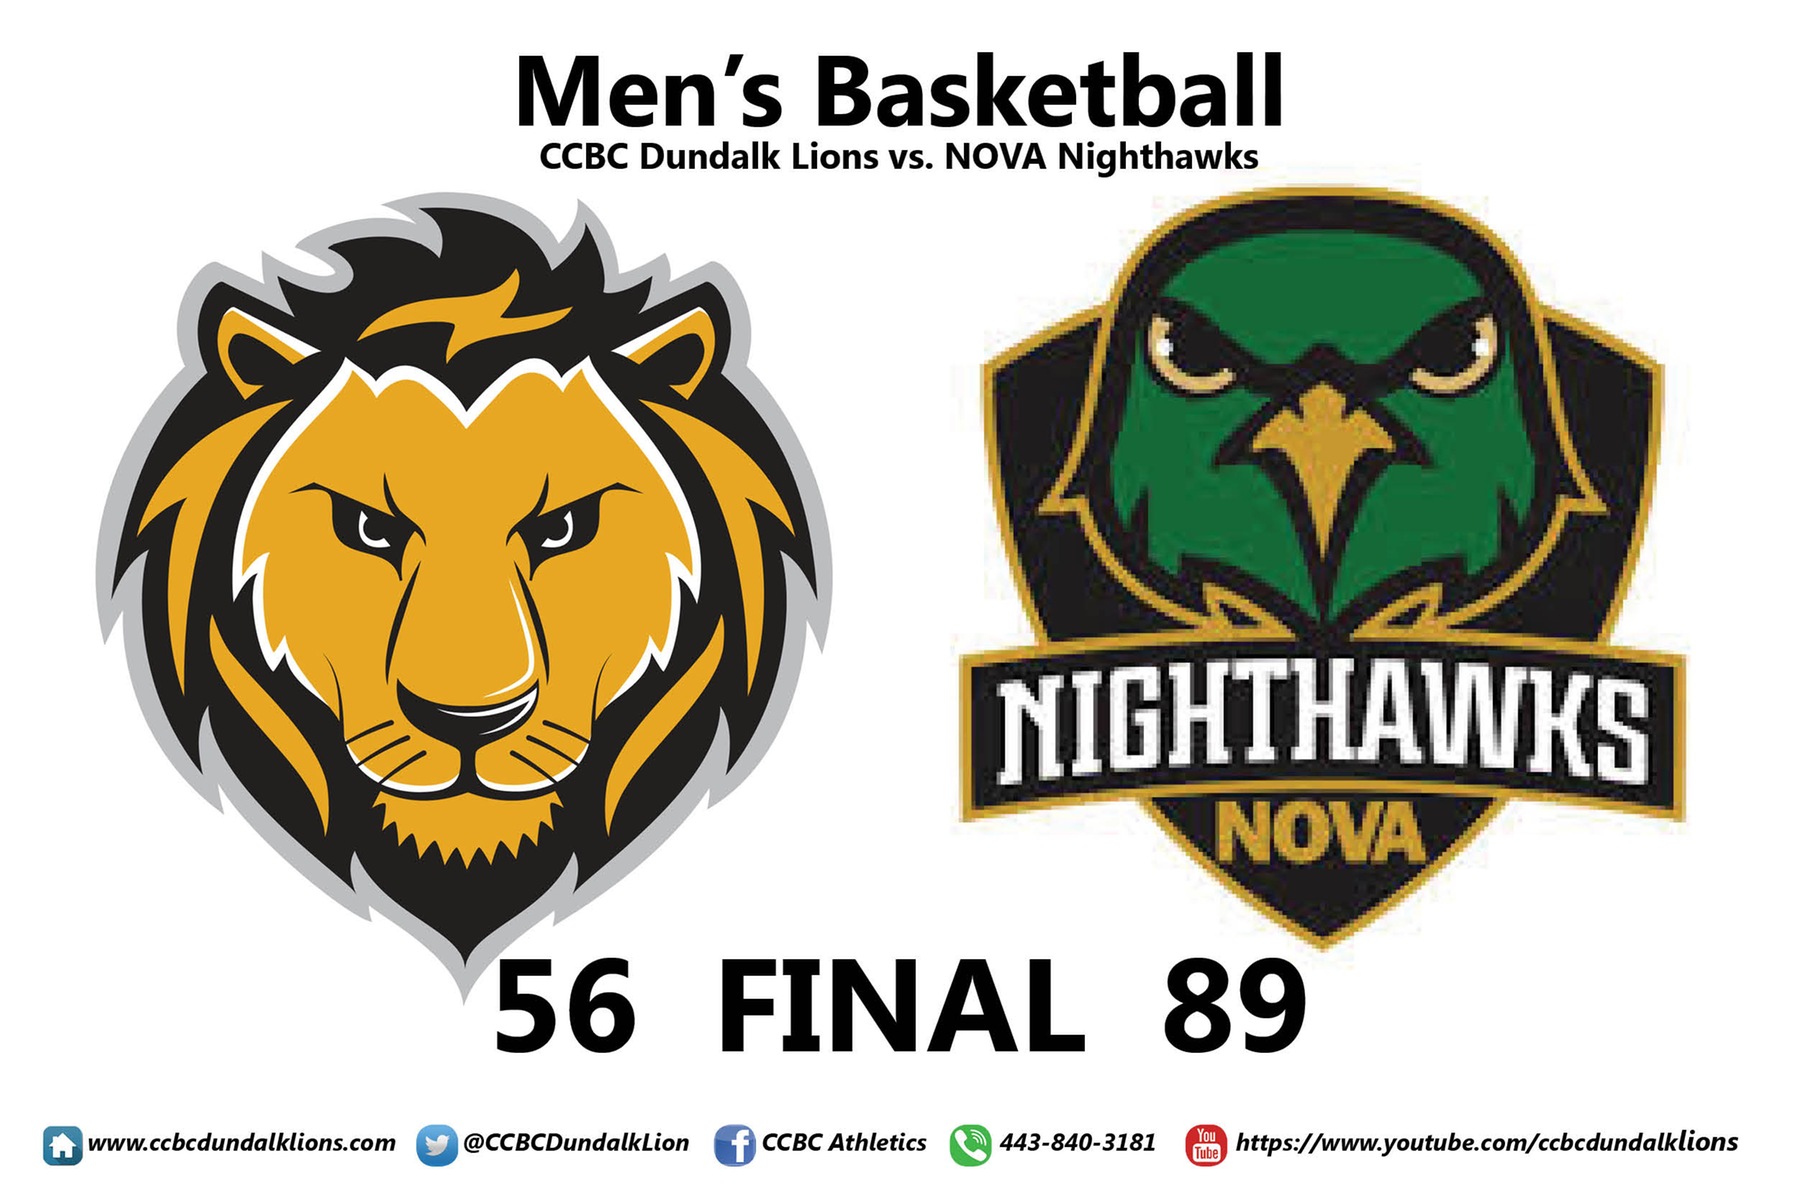 Lions bested by Nighthawks in 89-56 rout